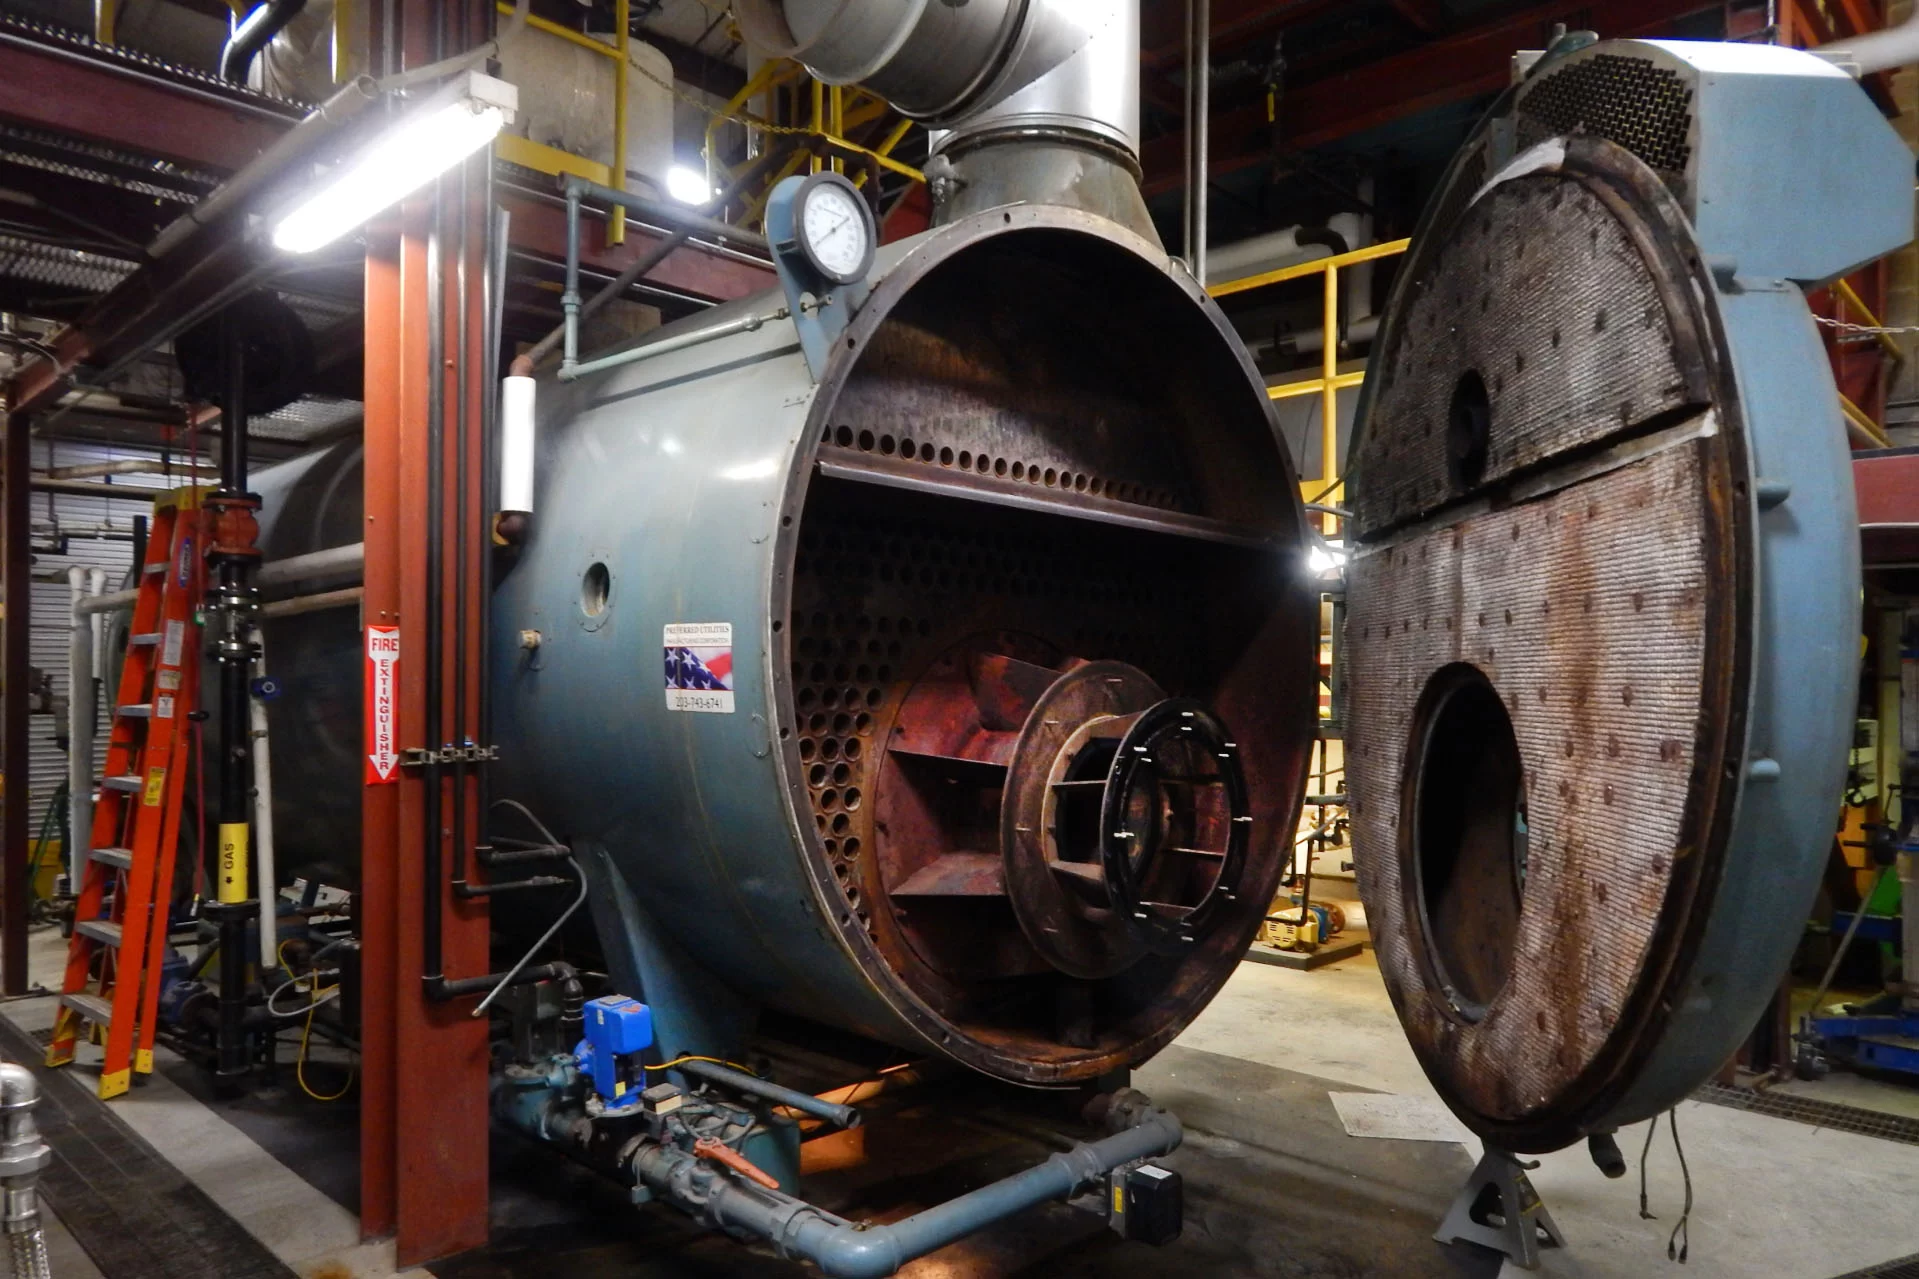 The campus steam plant's Boiler No. 3 will soon be equipped to burn a waste vegetable oil product called LR-100. (Doug Hubley/Bates College)